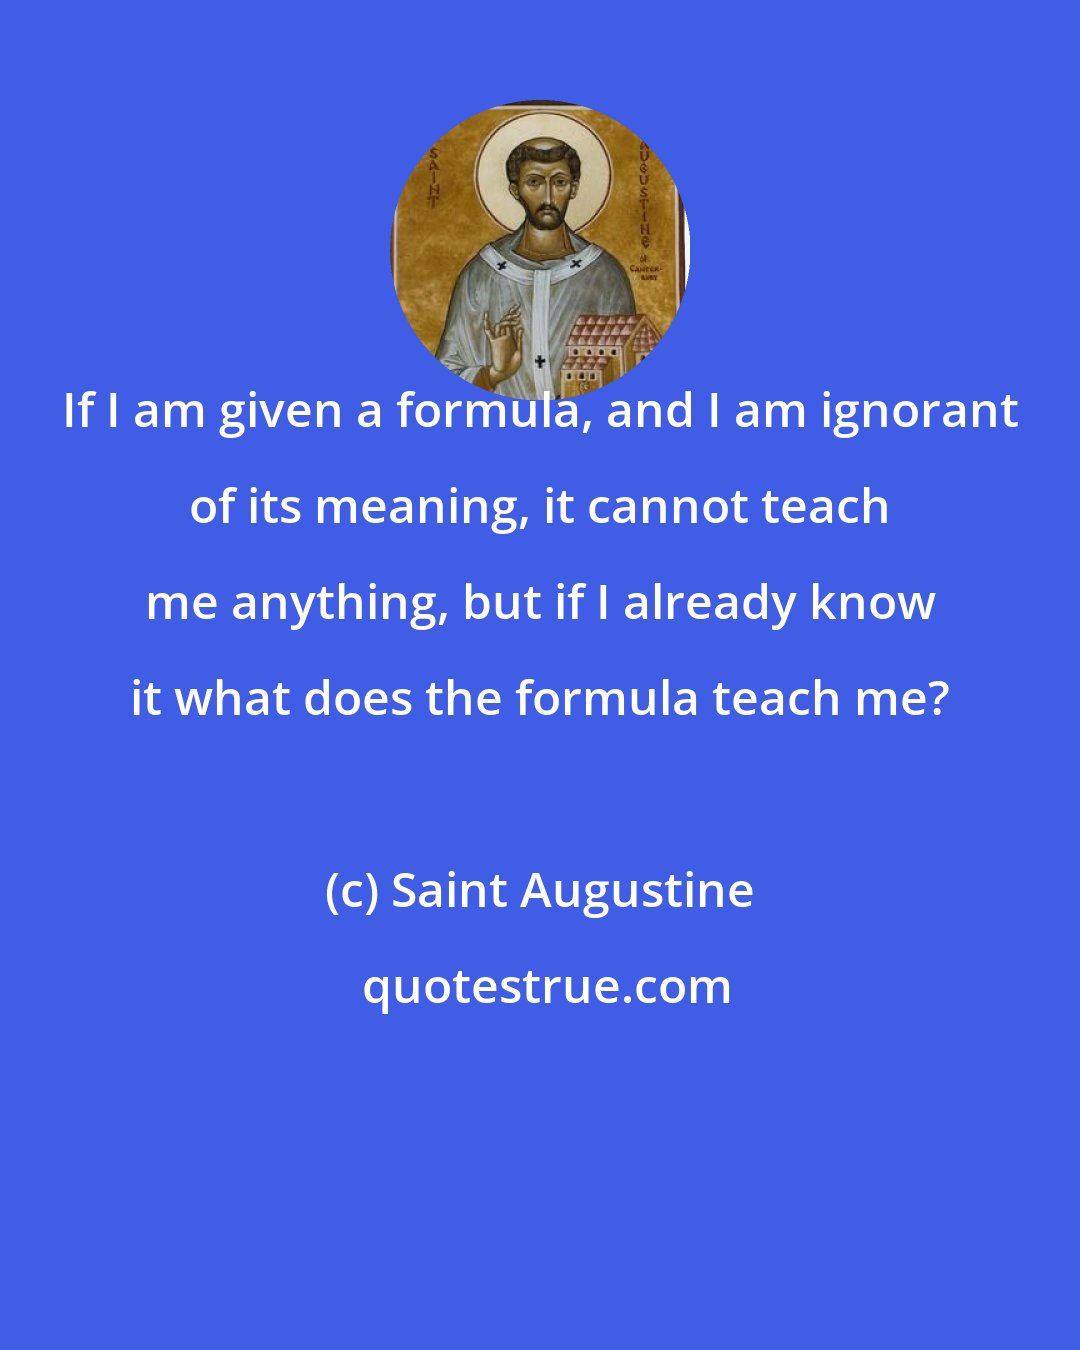 Saint Augustine: If I am given a formula, and I am ignorant of its meaning, it cannot teach me anything, but if I already know it what does the formula teach me?